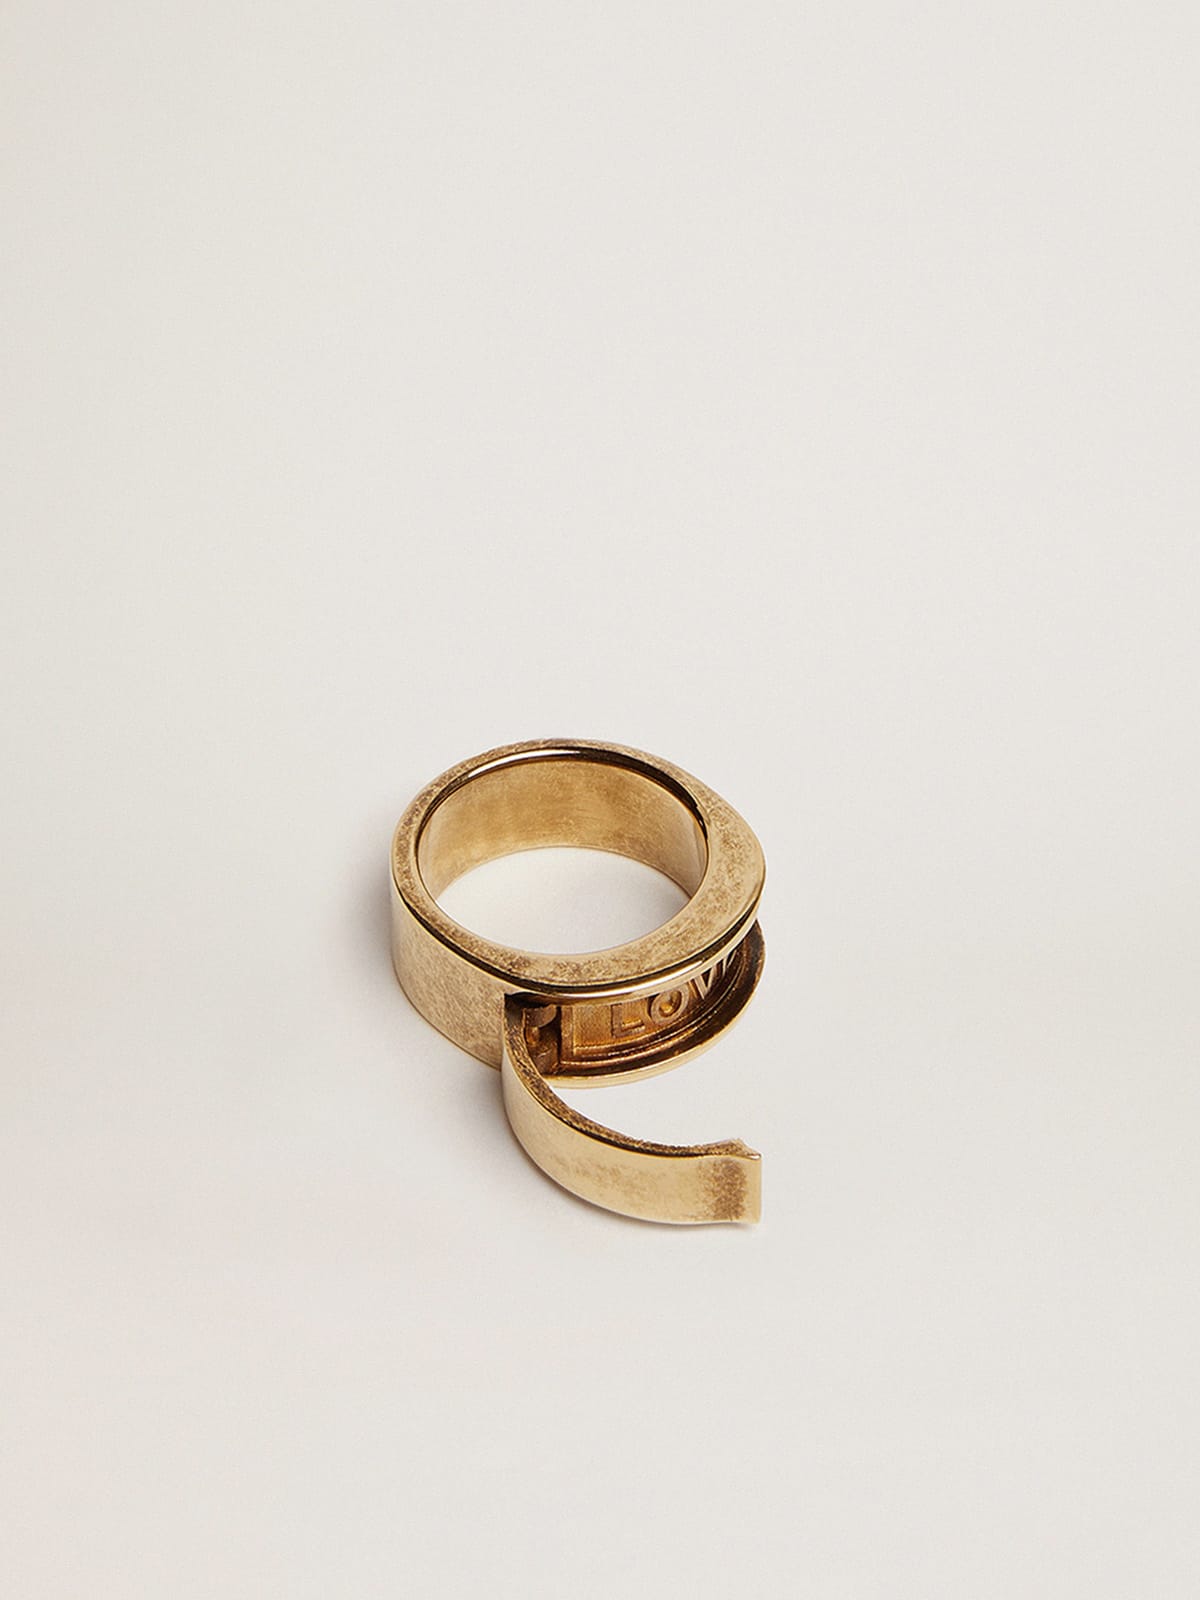 Golden Goose - Women's ring in old gold color with hidden message in 